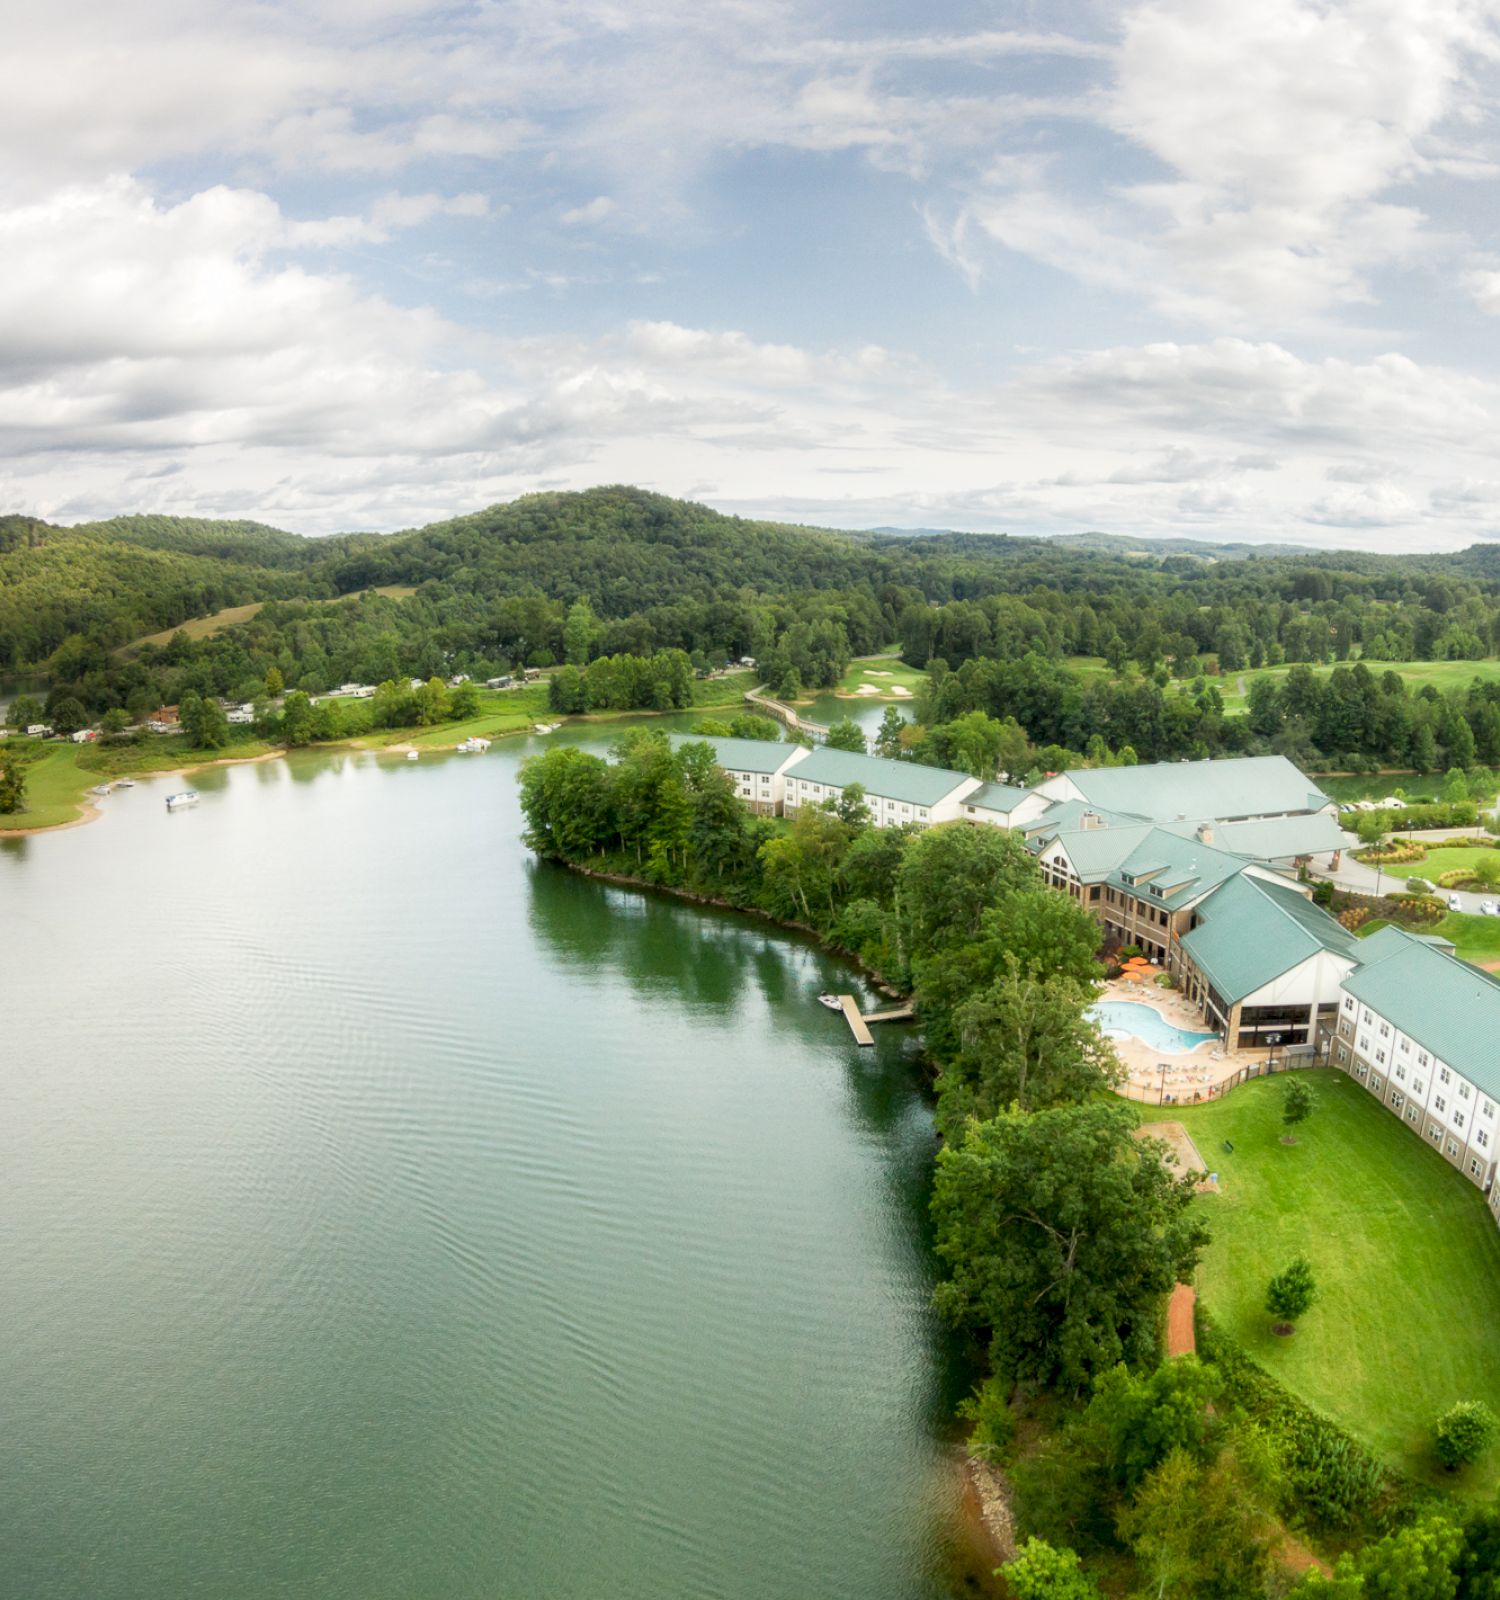 Aerial view of a large lakeside resort with green roofs, surrounded by lush forest and hills under a cloudy sky.